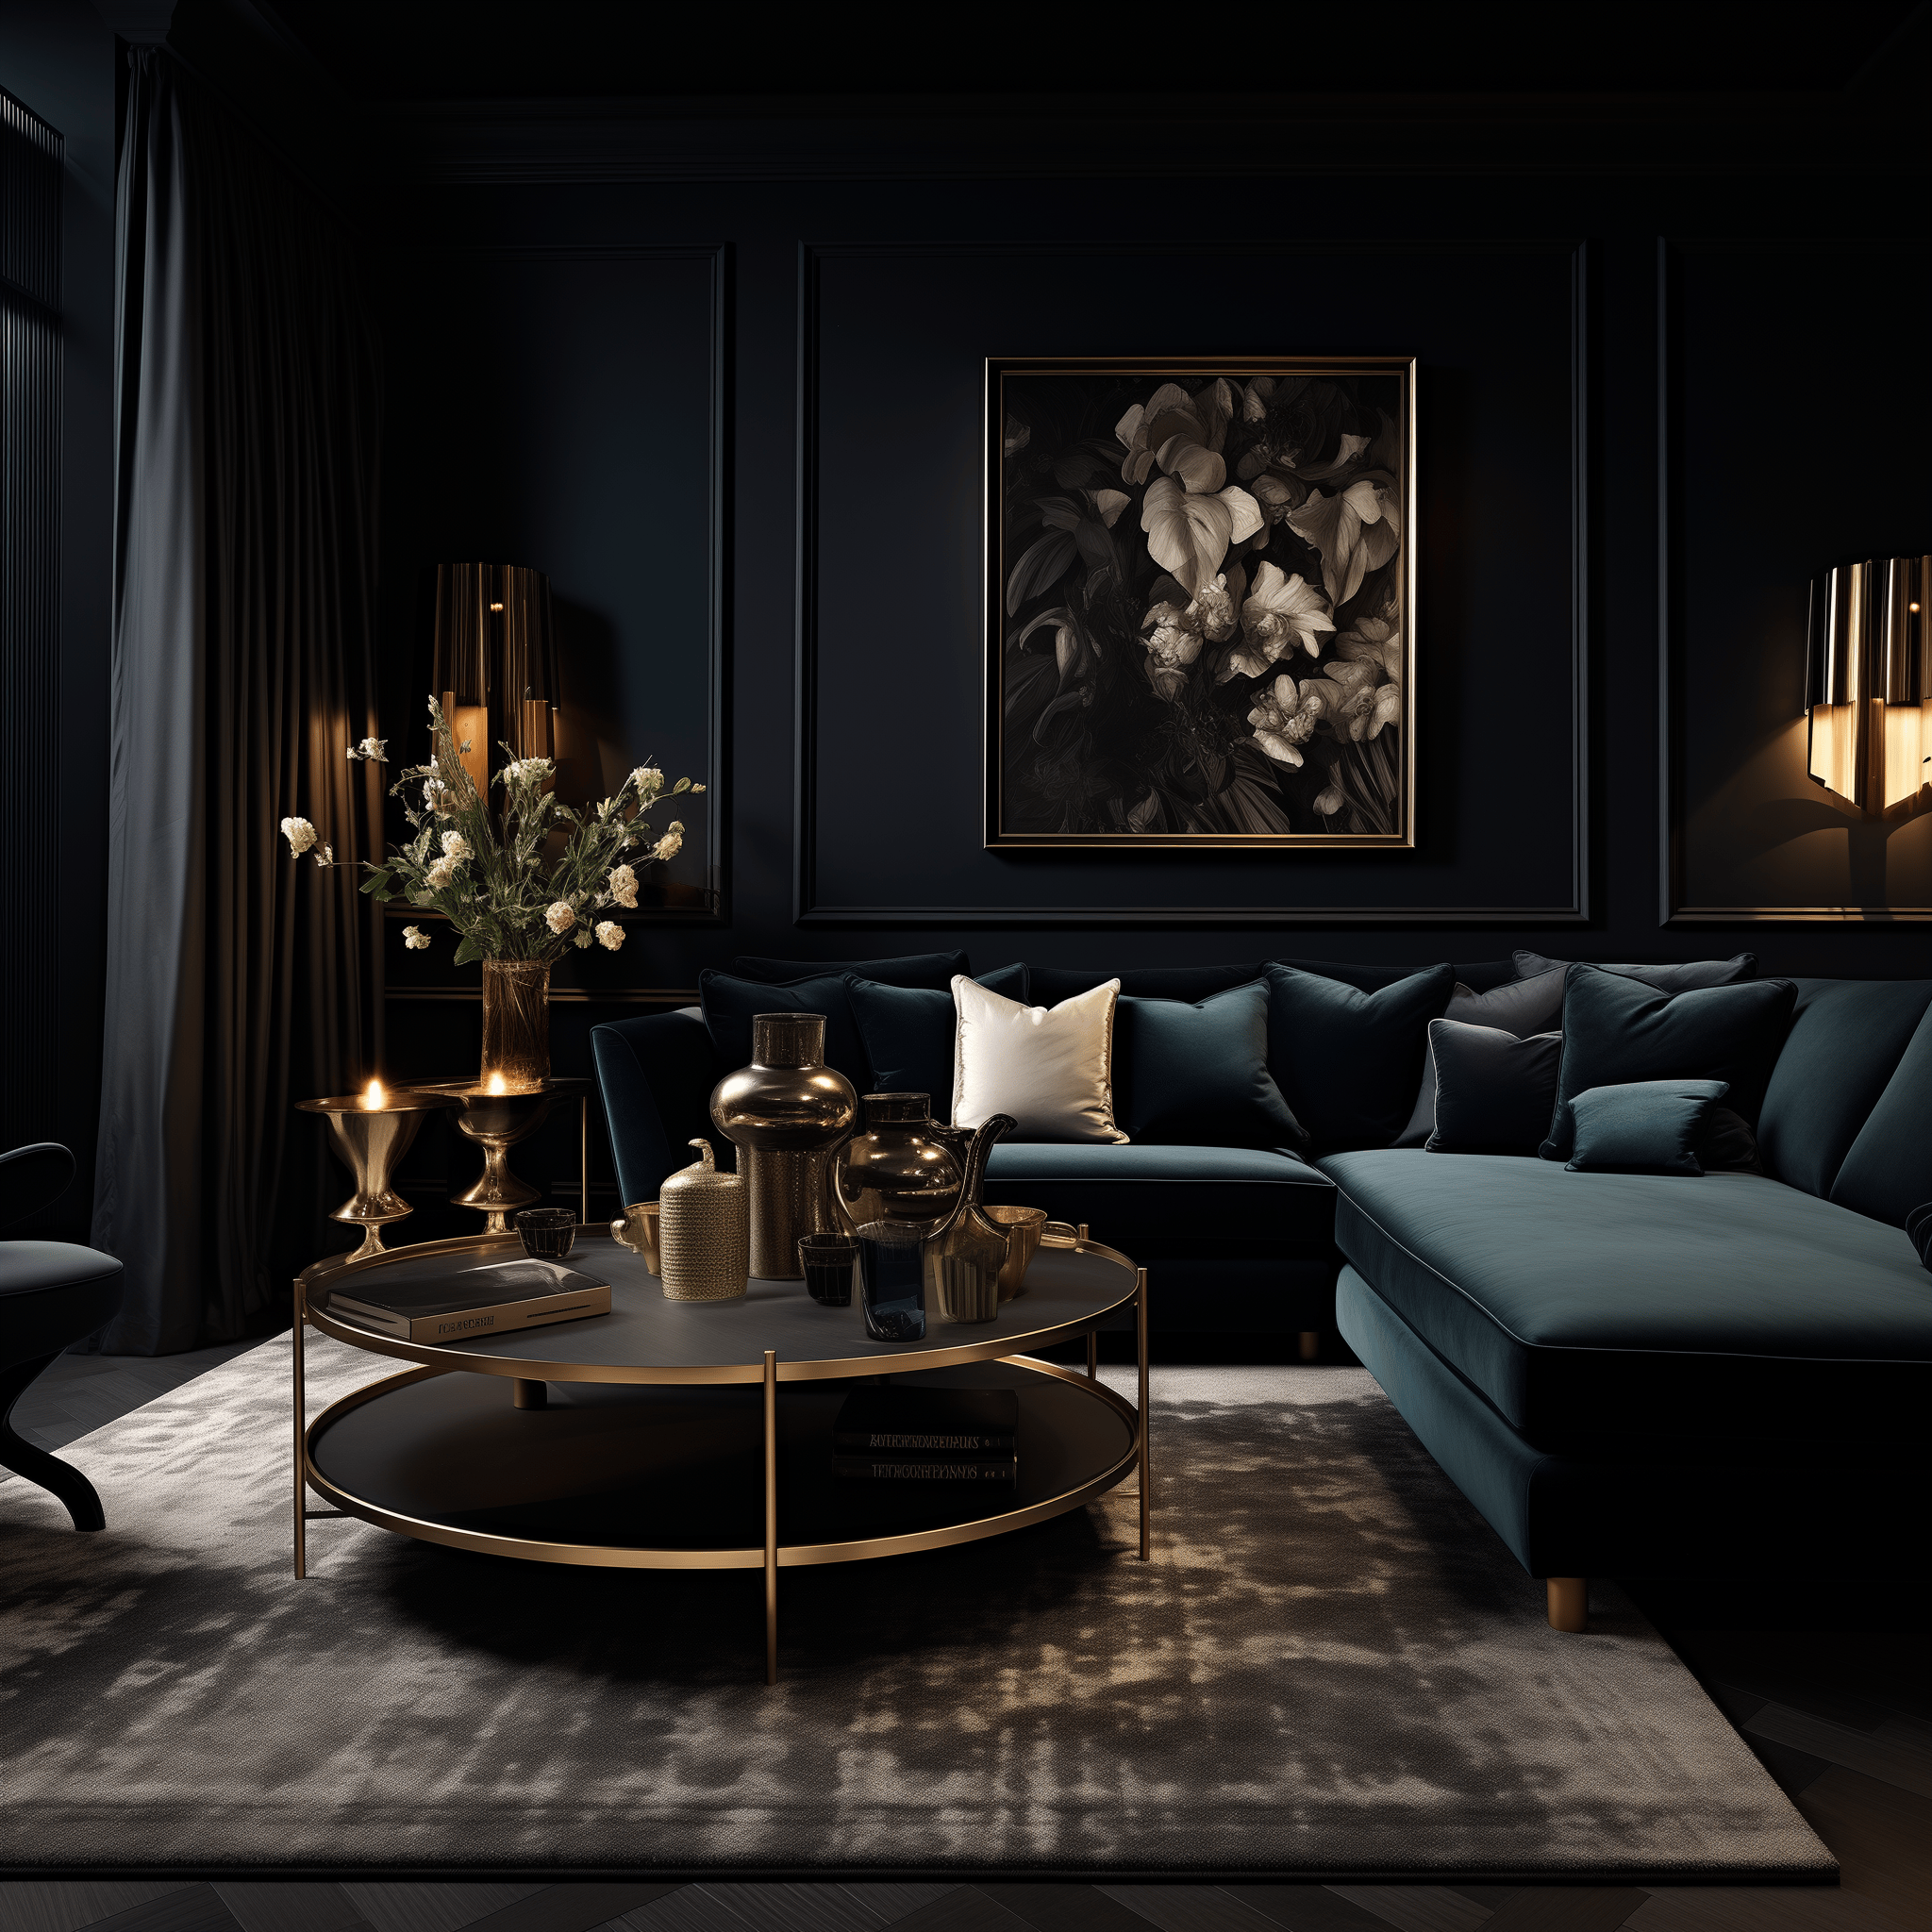 Luxurious dark living room in a real estate setting, showcasing eye-level views of elegant, contemporary furniture and stylish decor.